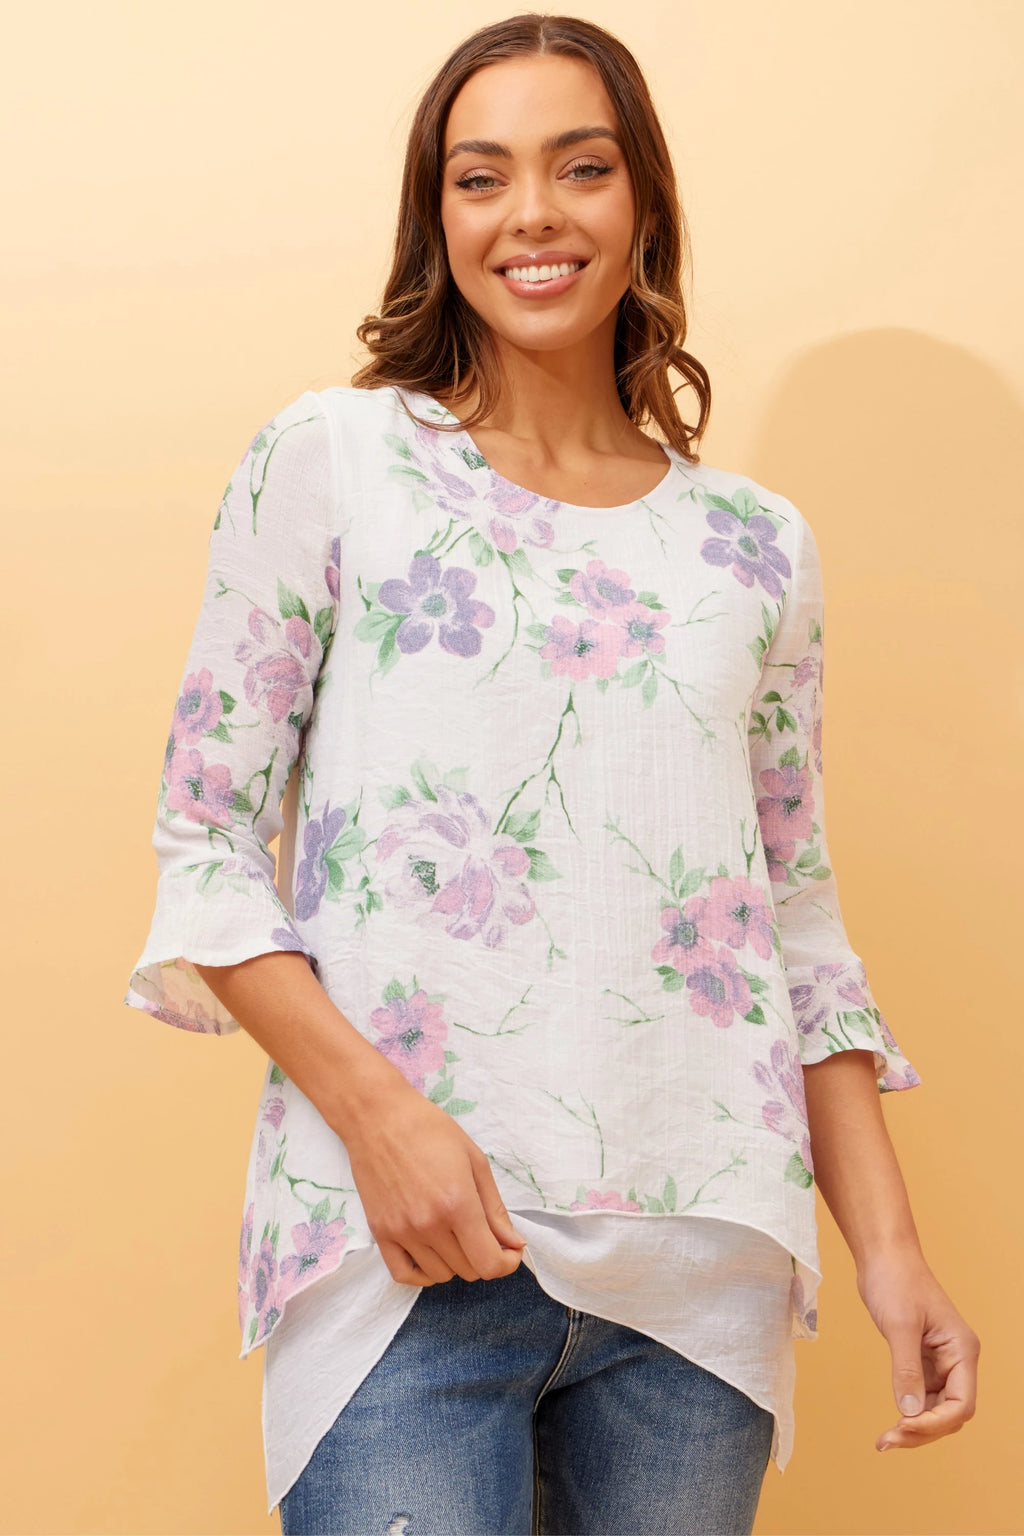 RUMI DOUBLE LAYER FLORAL TUNIC TOP